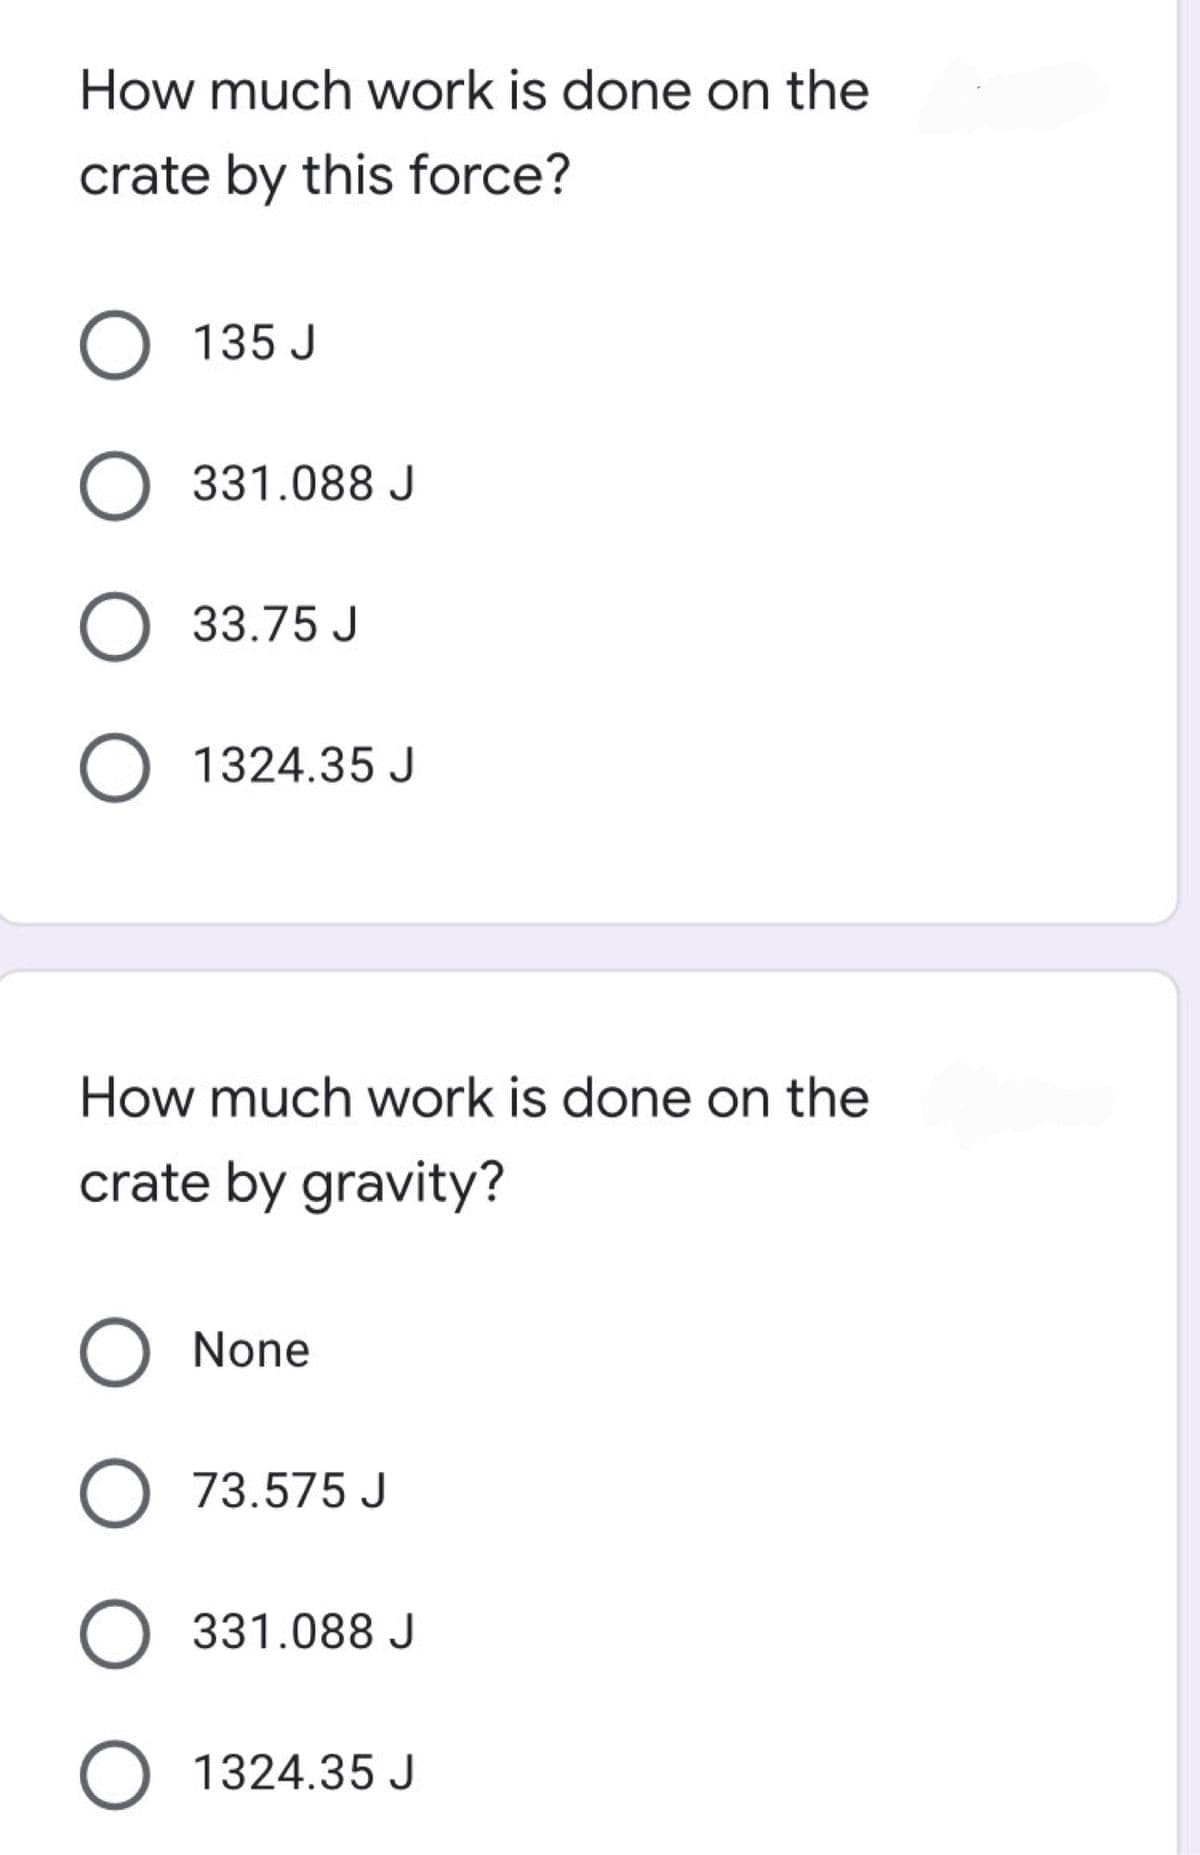 How much work is done on the
crate by this force?
O 135.
135 J
331.088 J
O 33.75 J
O 1324.35 J
How much work is done on the
crate by gravity?
O None
O 73.575 J
331.088 J
O 1324.35 J
